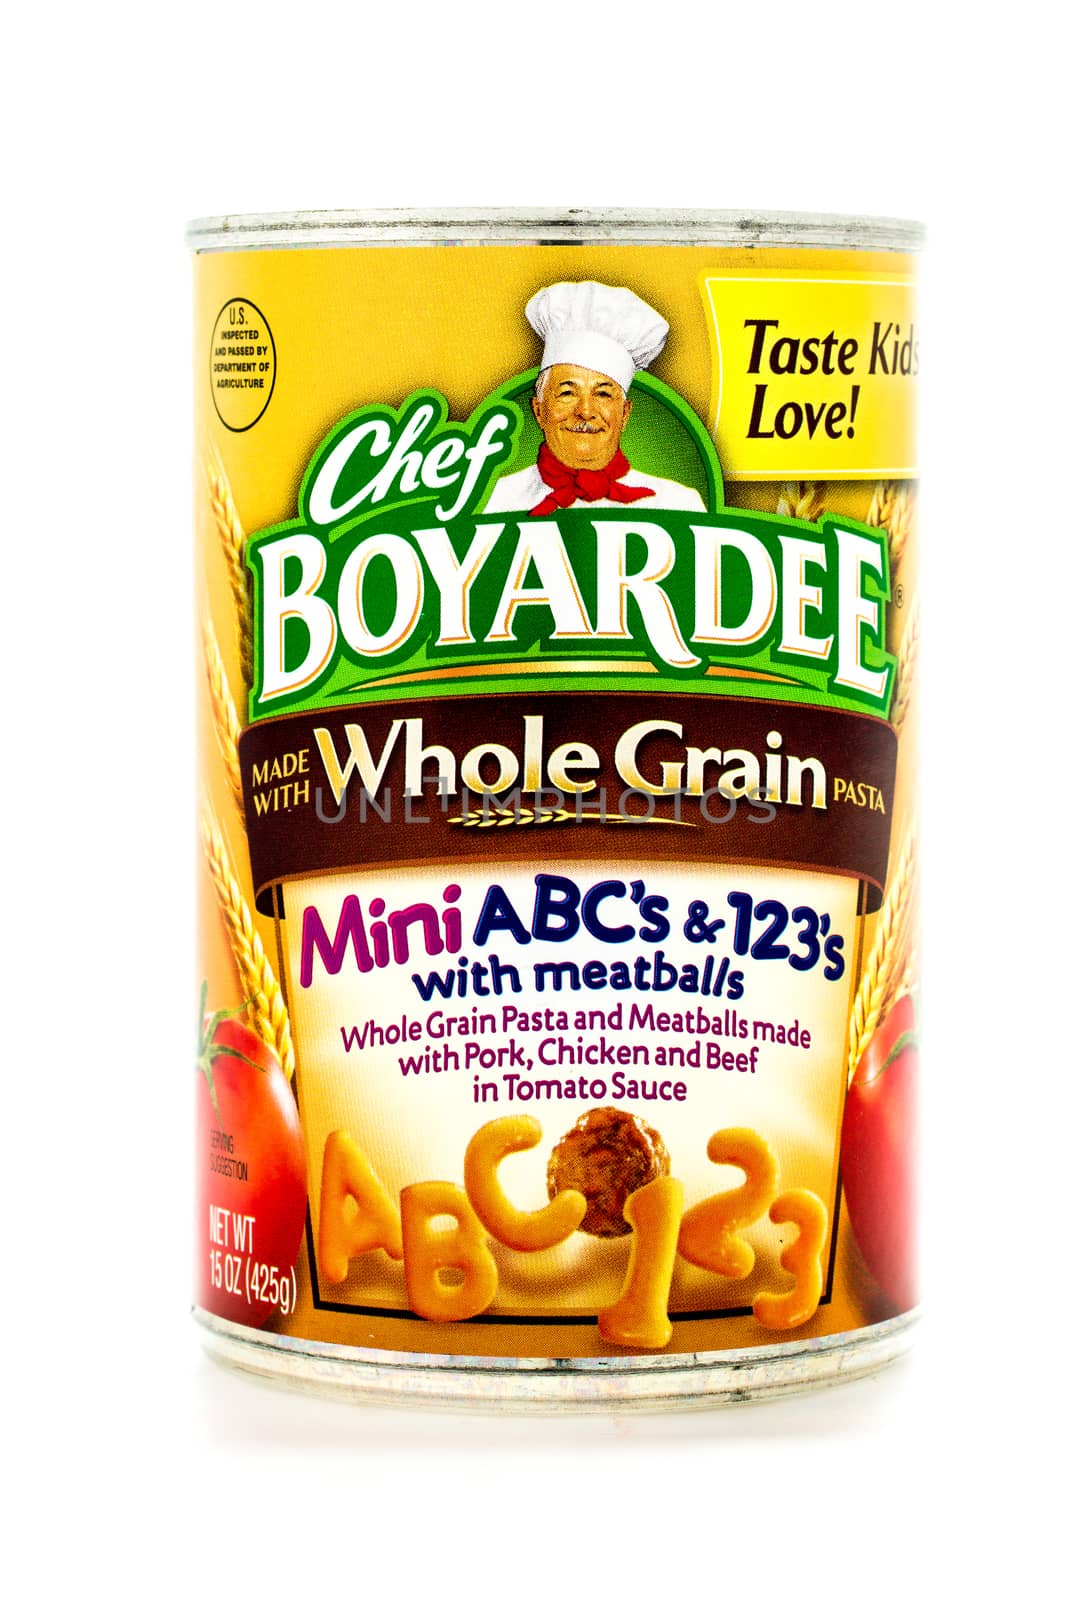 Winneconne, WI - 3 February 2015:  Can of Mini ABC's & 123's with meatballs by Chef Boyardee. Chef Boyardeee has been enjoyed by everyone since 1928.